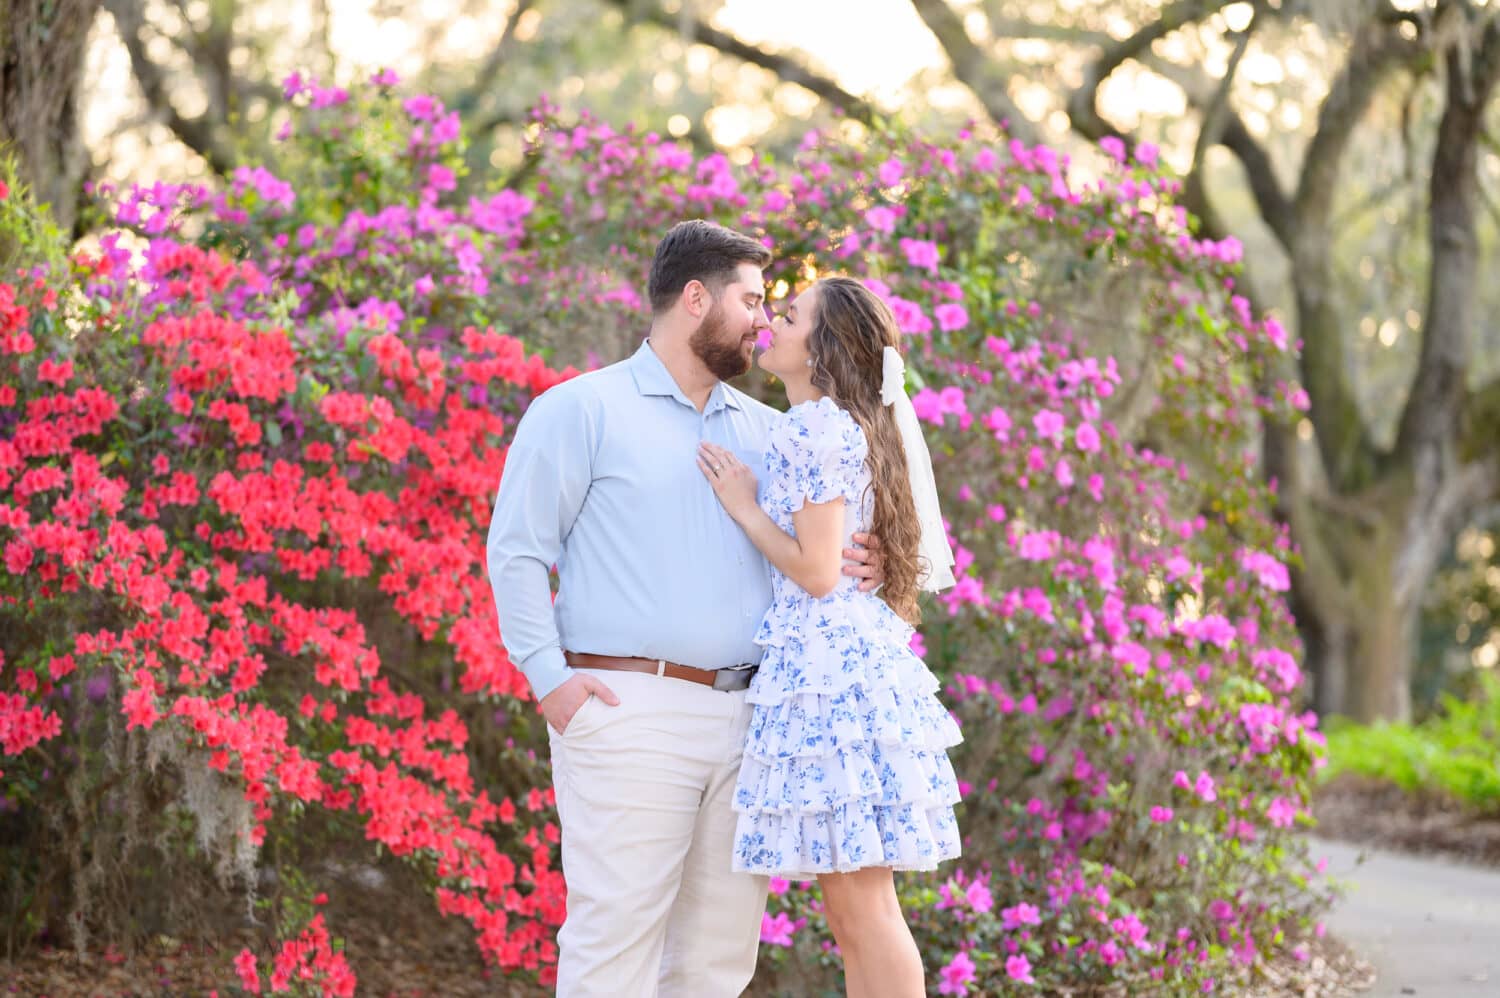 Engagement portraits in front of the red and purple flowers - Caledonia Golf and Fish Club